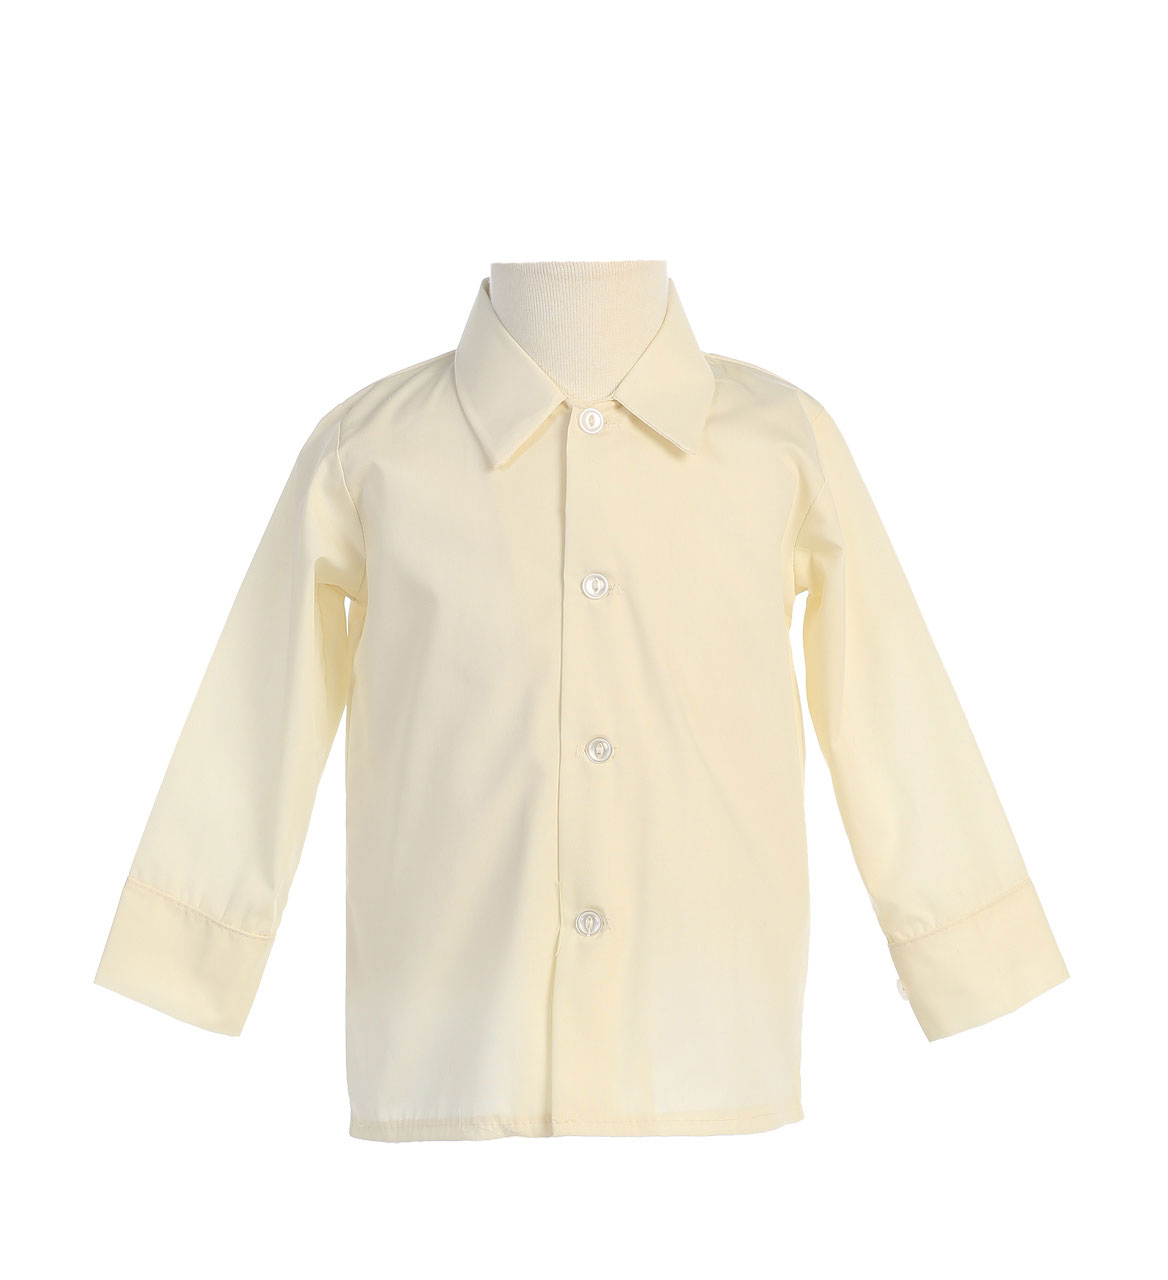 Boys Long Sleeved Simple Dress Shirt - Available in Ivory XL